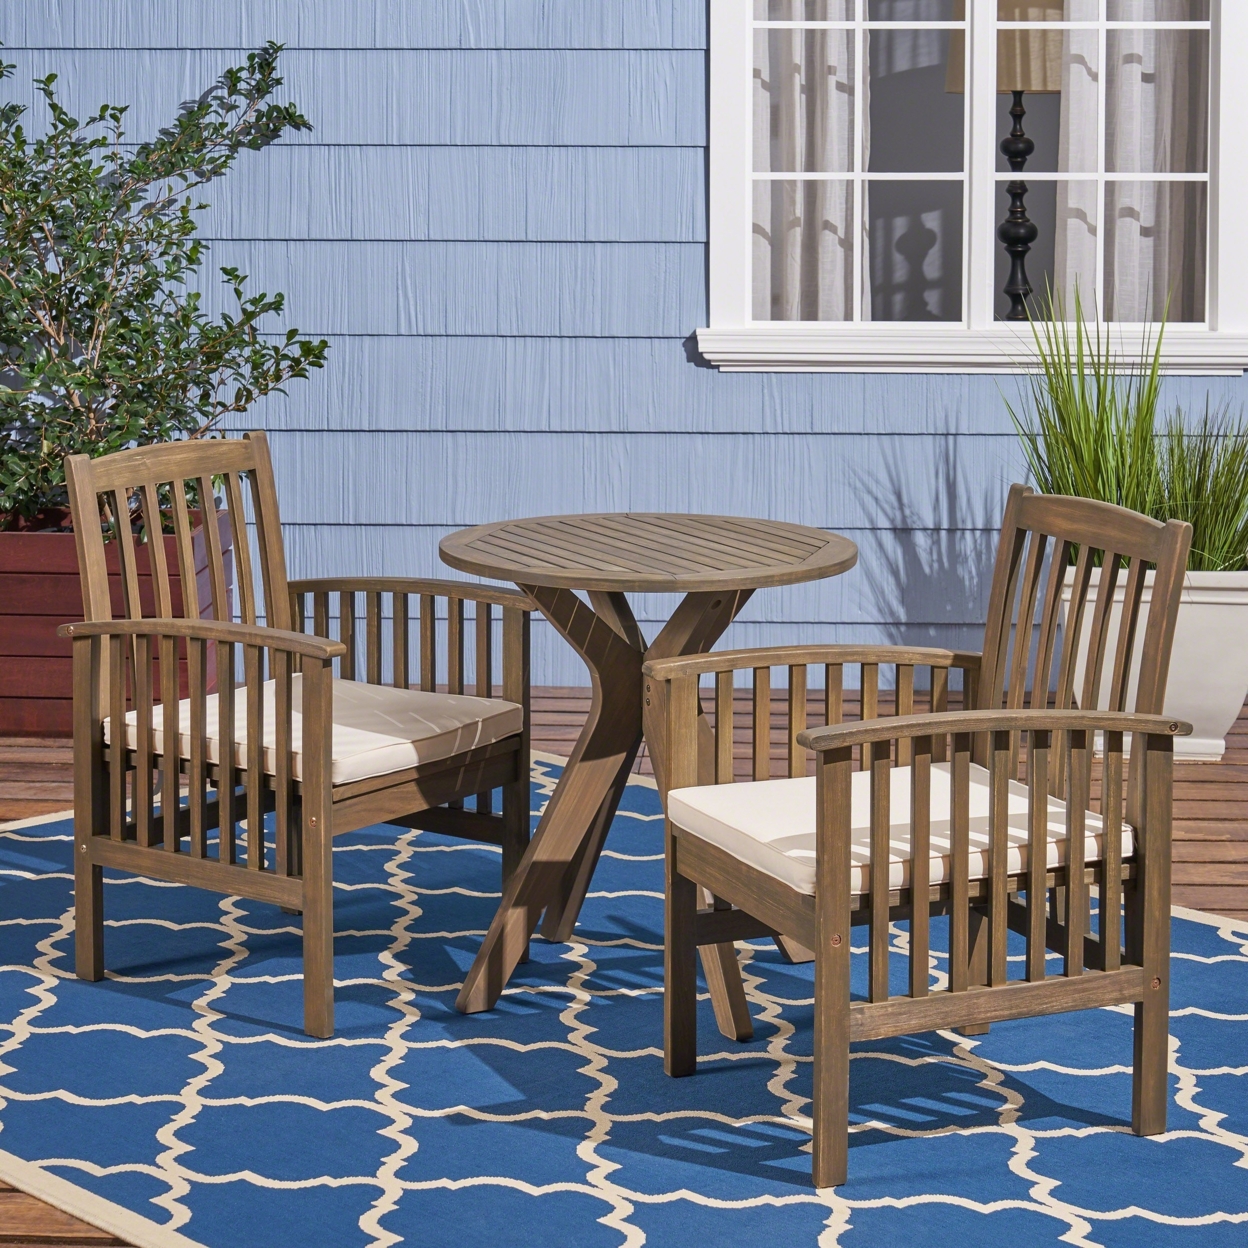 Phoenix Outdoor Acacia 2-Seater Bistro Set With Cushions And 28 Round Table With X-Legs - Gray / Cream